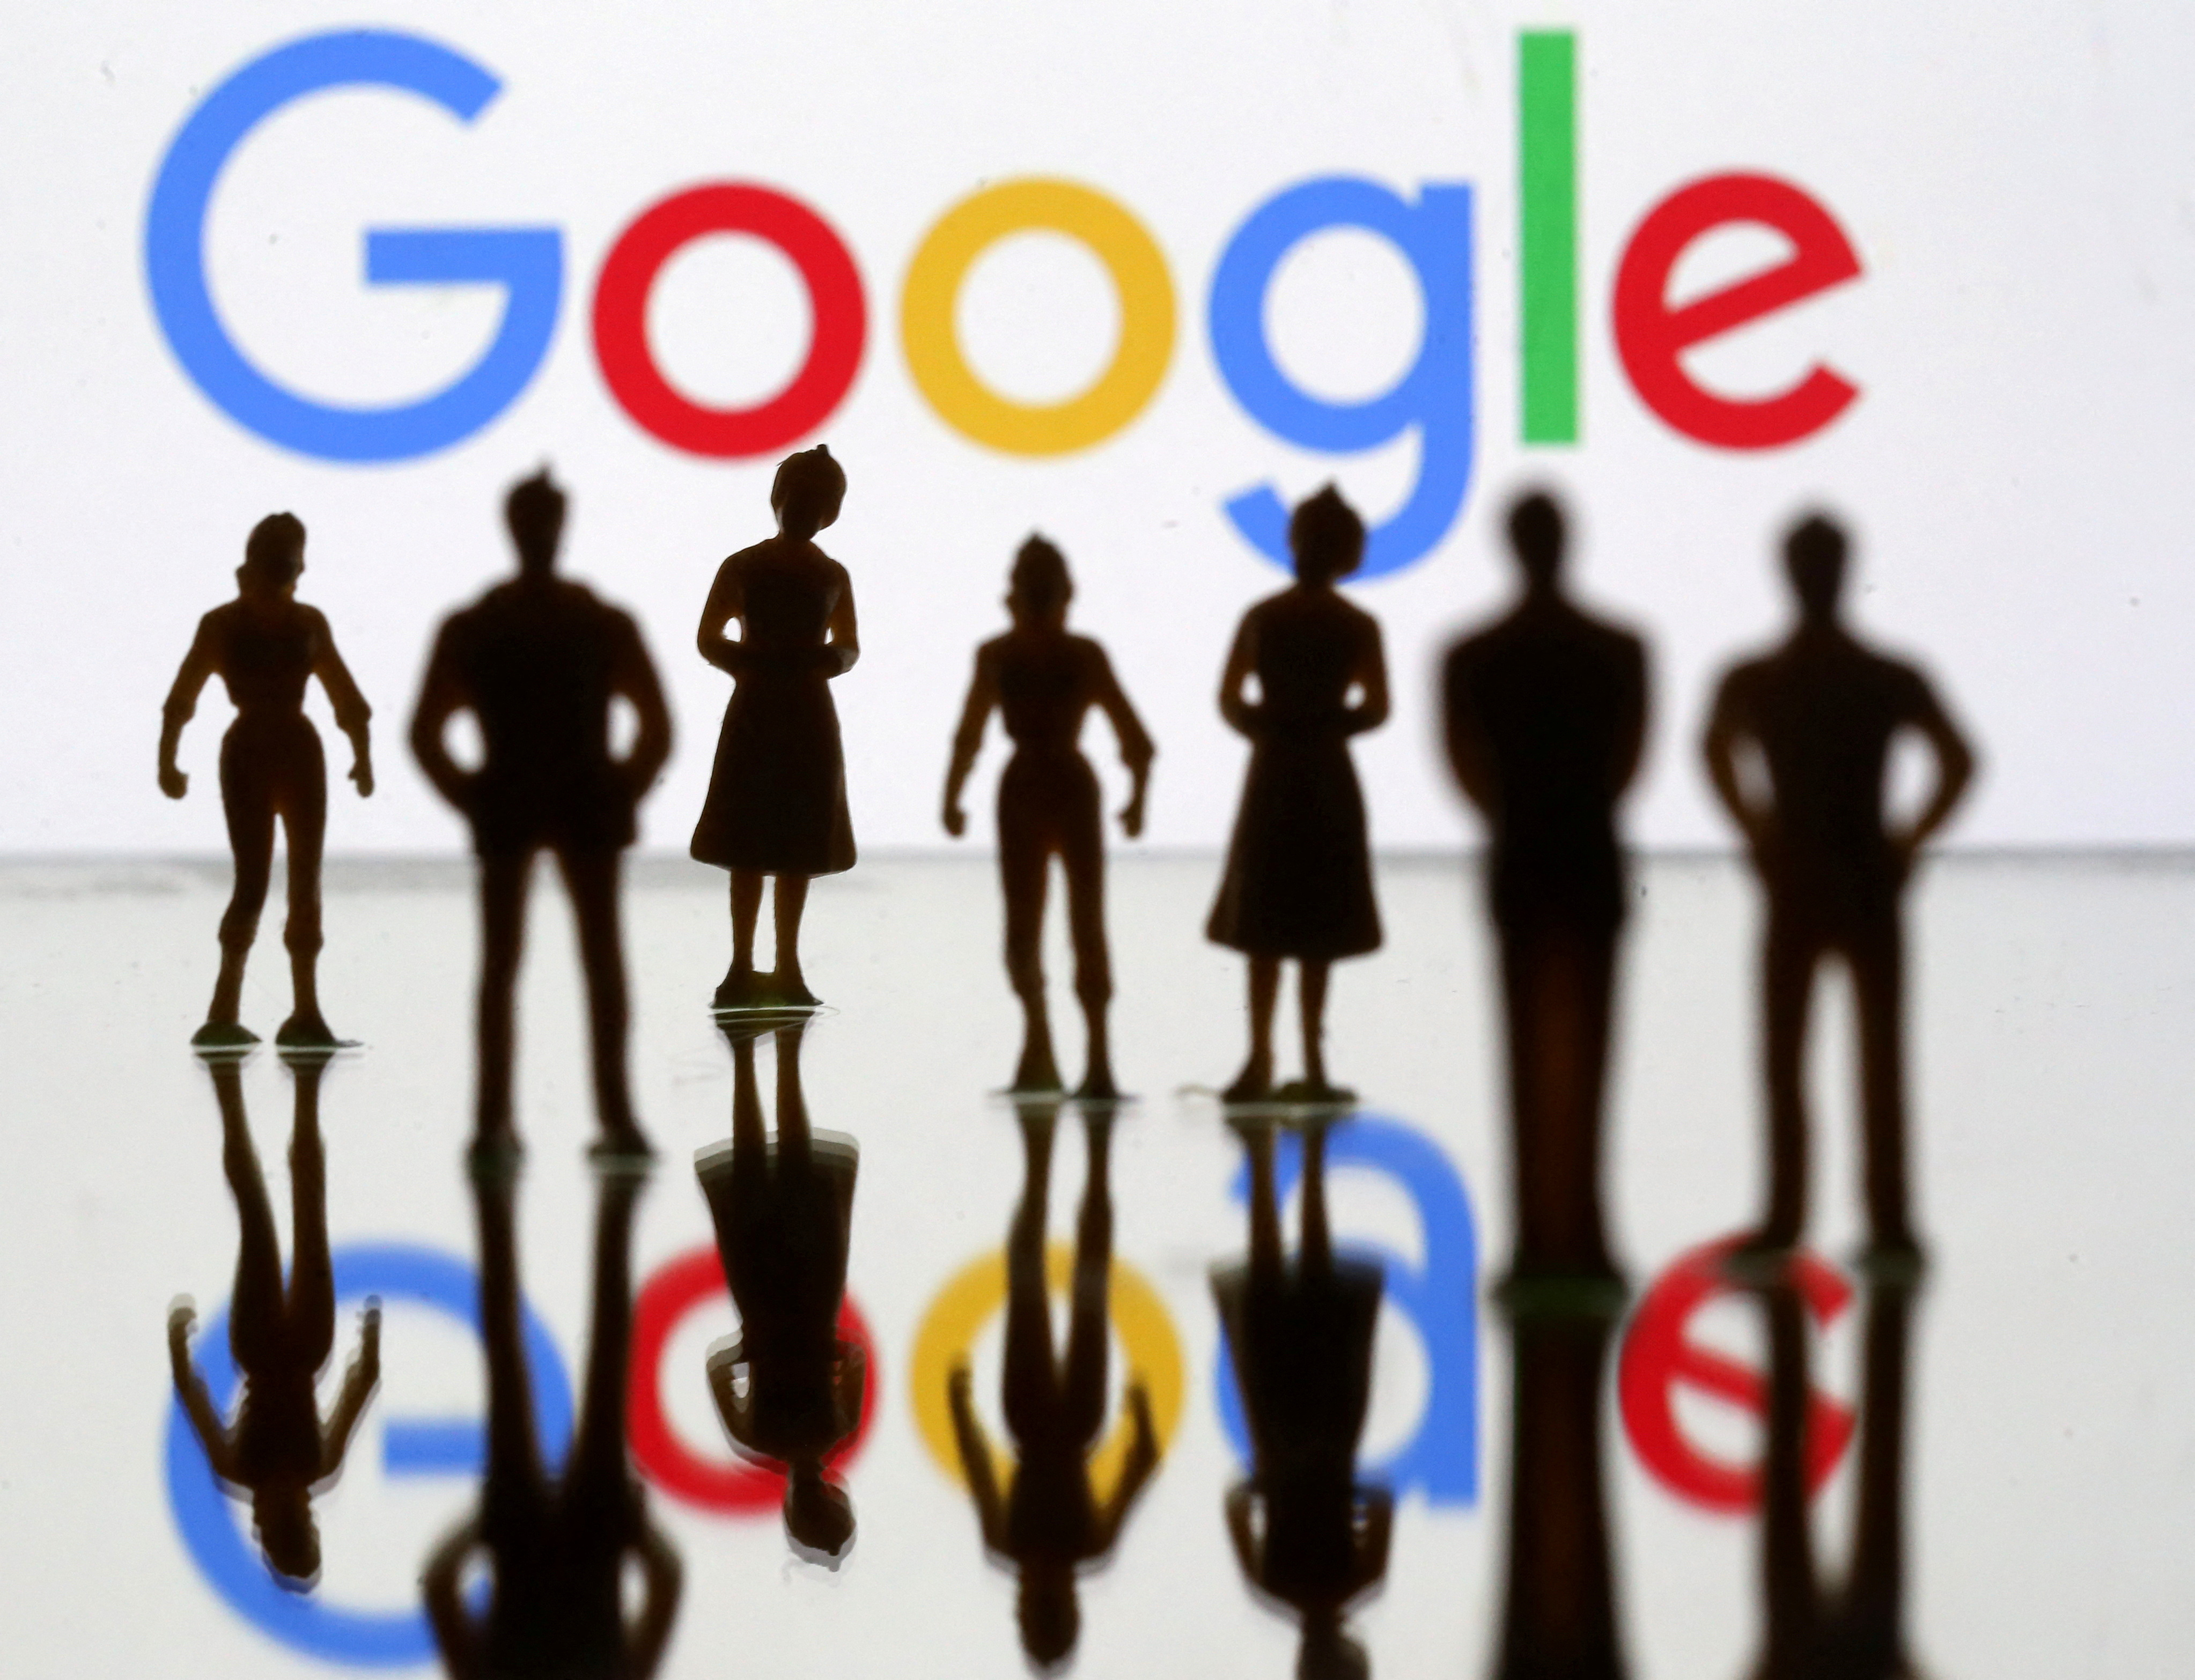 Small toy figures are seen in front of Google logo in this illustration picture